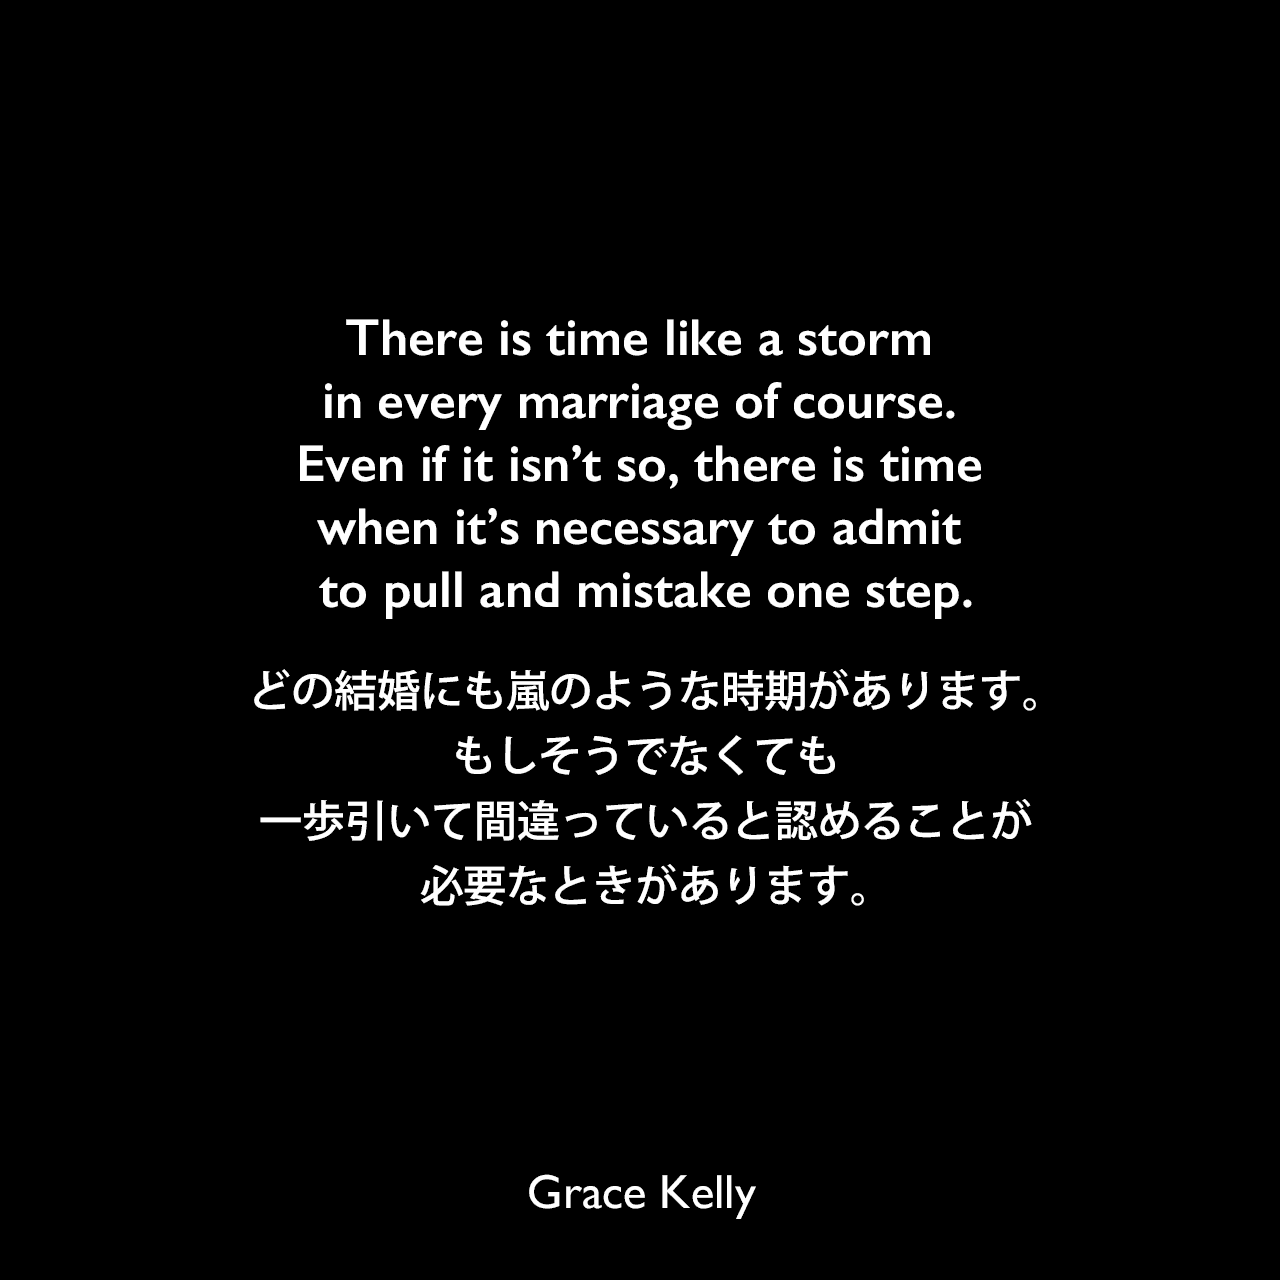 There is time like a storm in every marriage of course. Even if it isn’t so, there is time when it’s necessary to admit to pull and mistake one step.どの結婚にも嵐のような時期があります。もしそうでなくても、一歩引いて間違っていると認めることが必要なときがあります。Grace Kelly